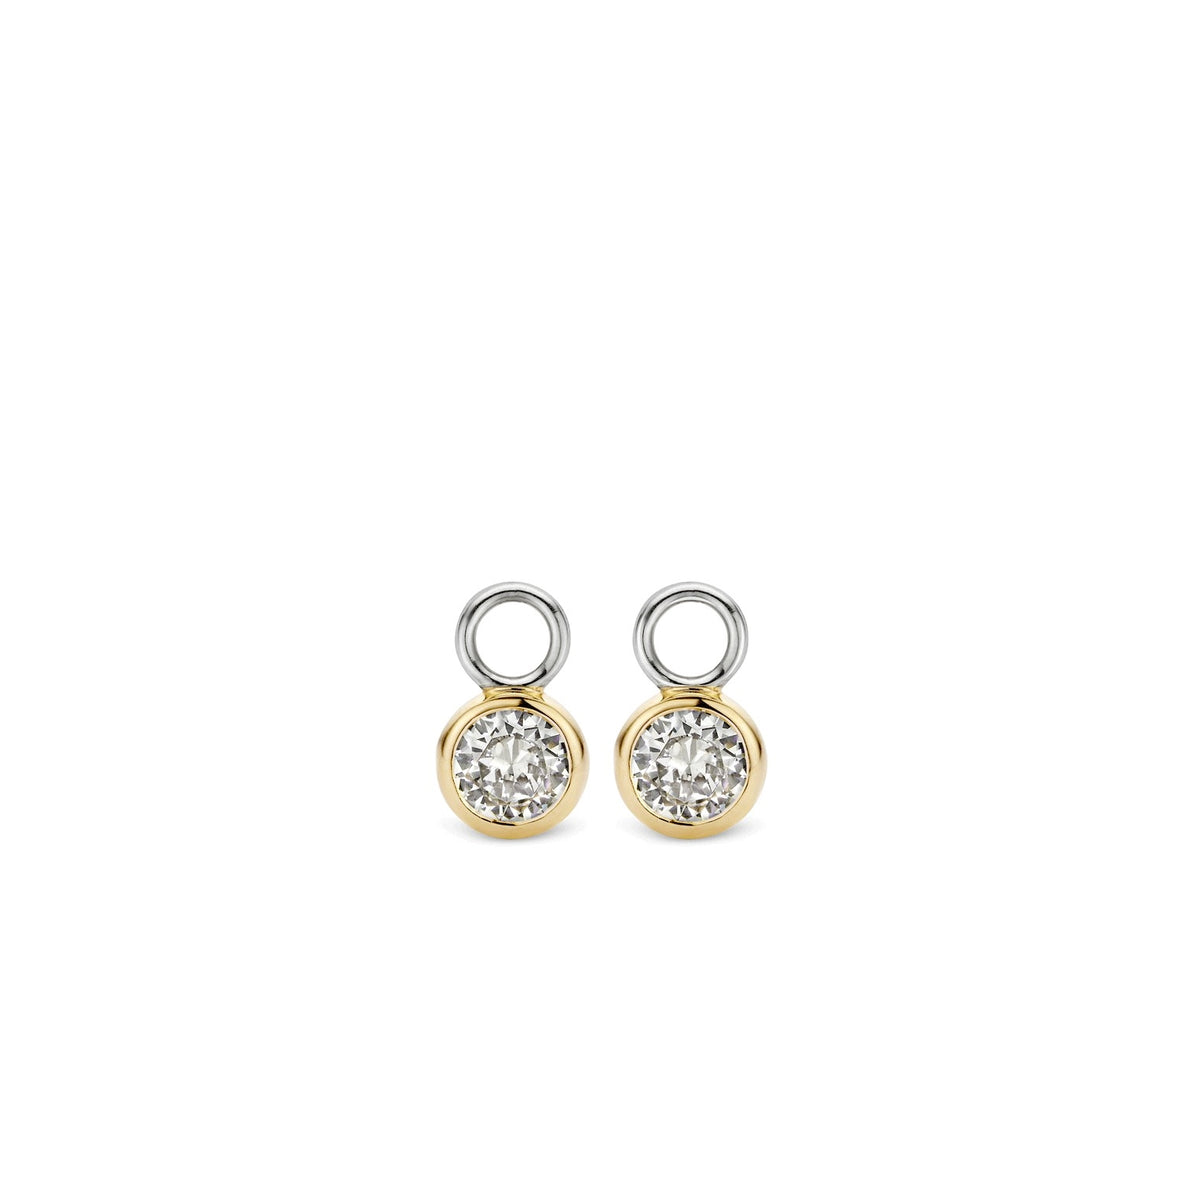 TI SENTO Sterling Silver Gold Tone Ear Charms with Bezel Set Cubic Zirconia